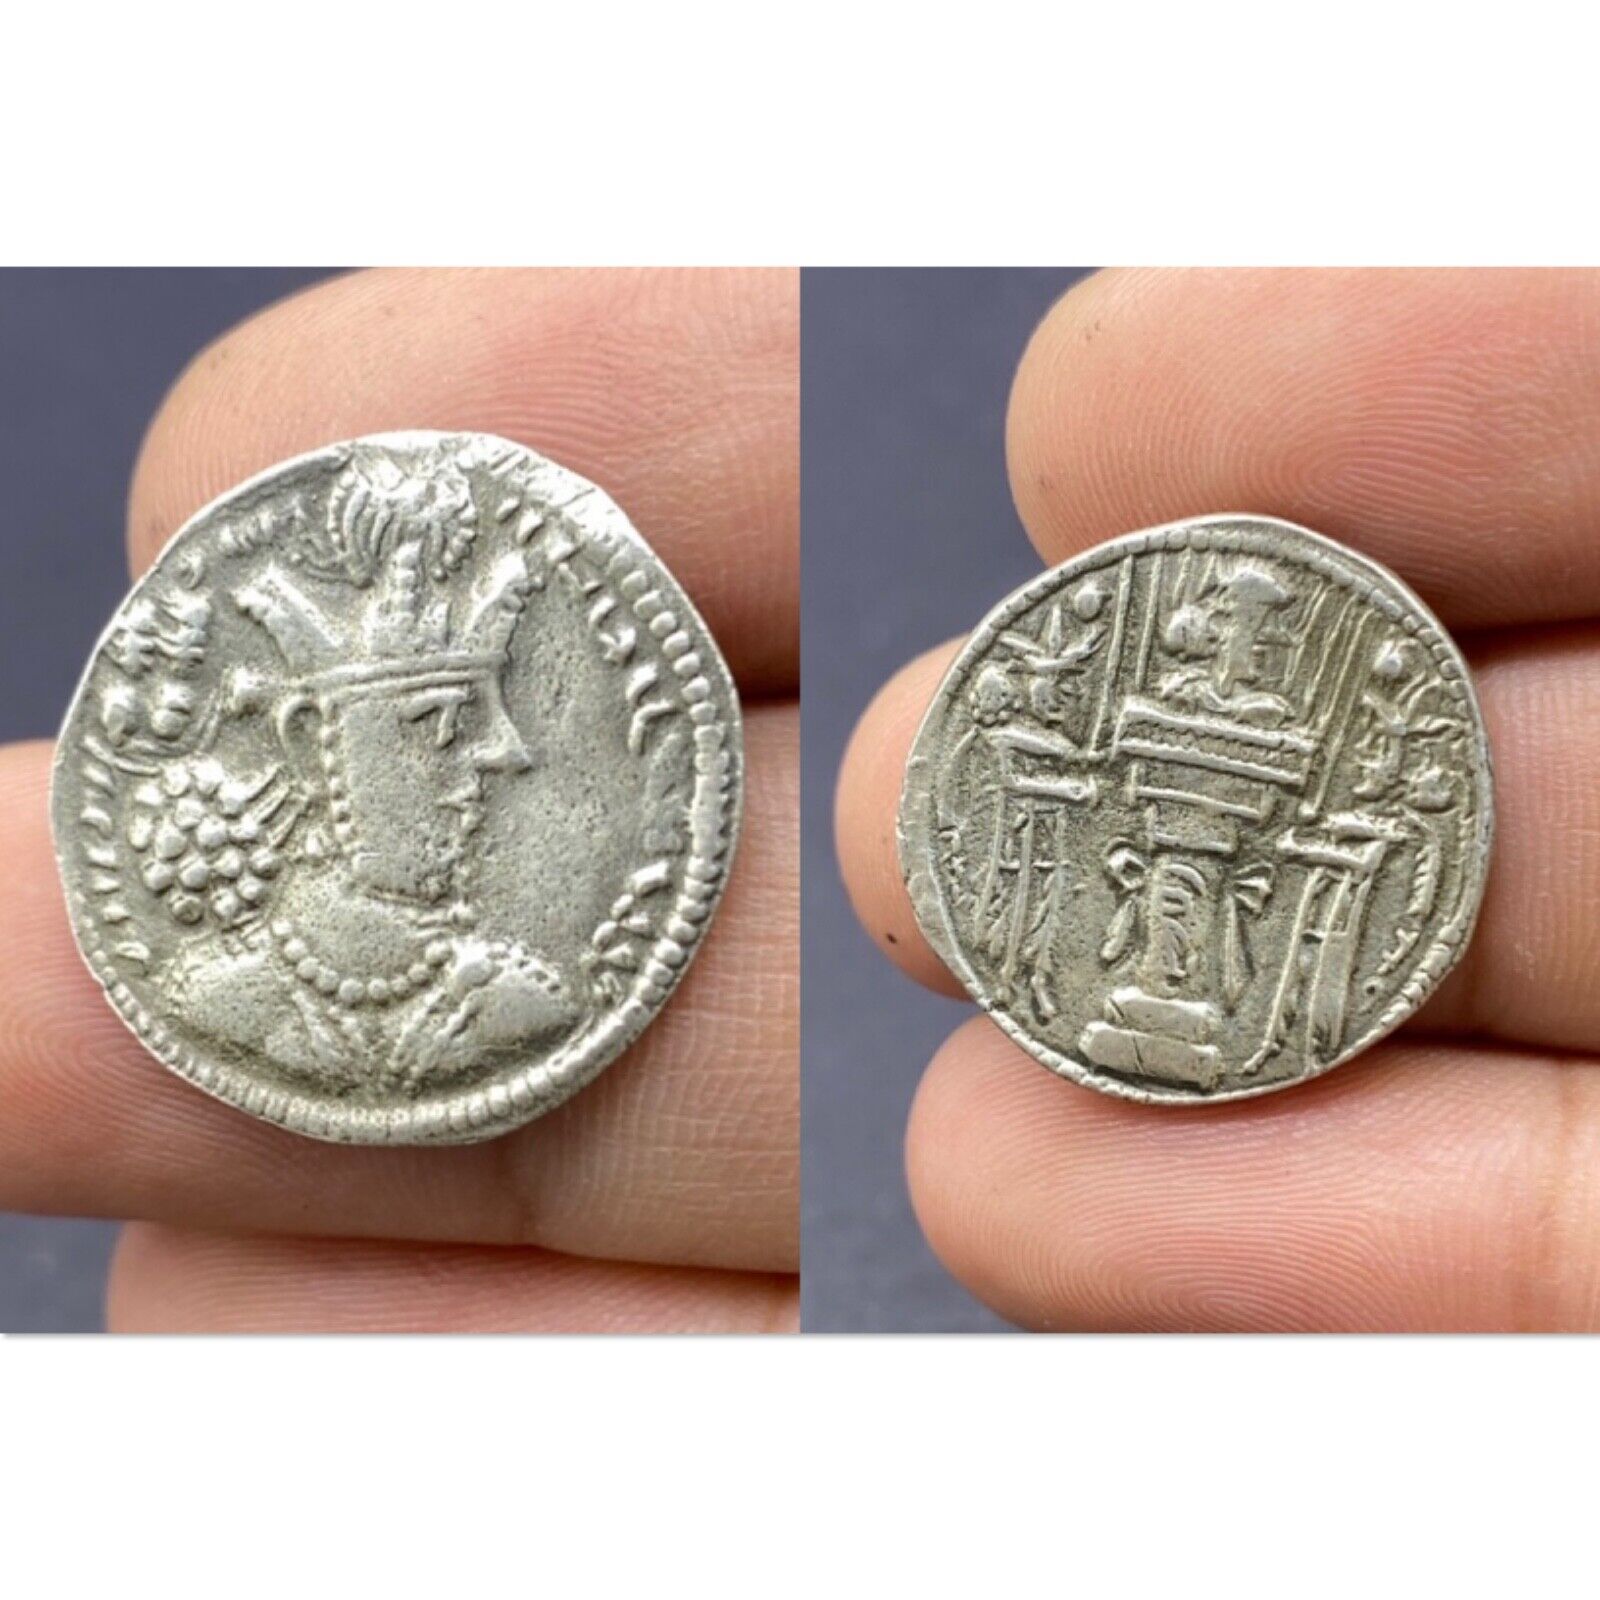 Ancient Sassanian king Shapur II Solid Silver Coin - (309-379 AD) E